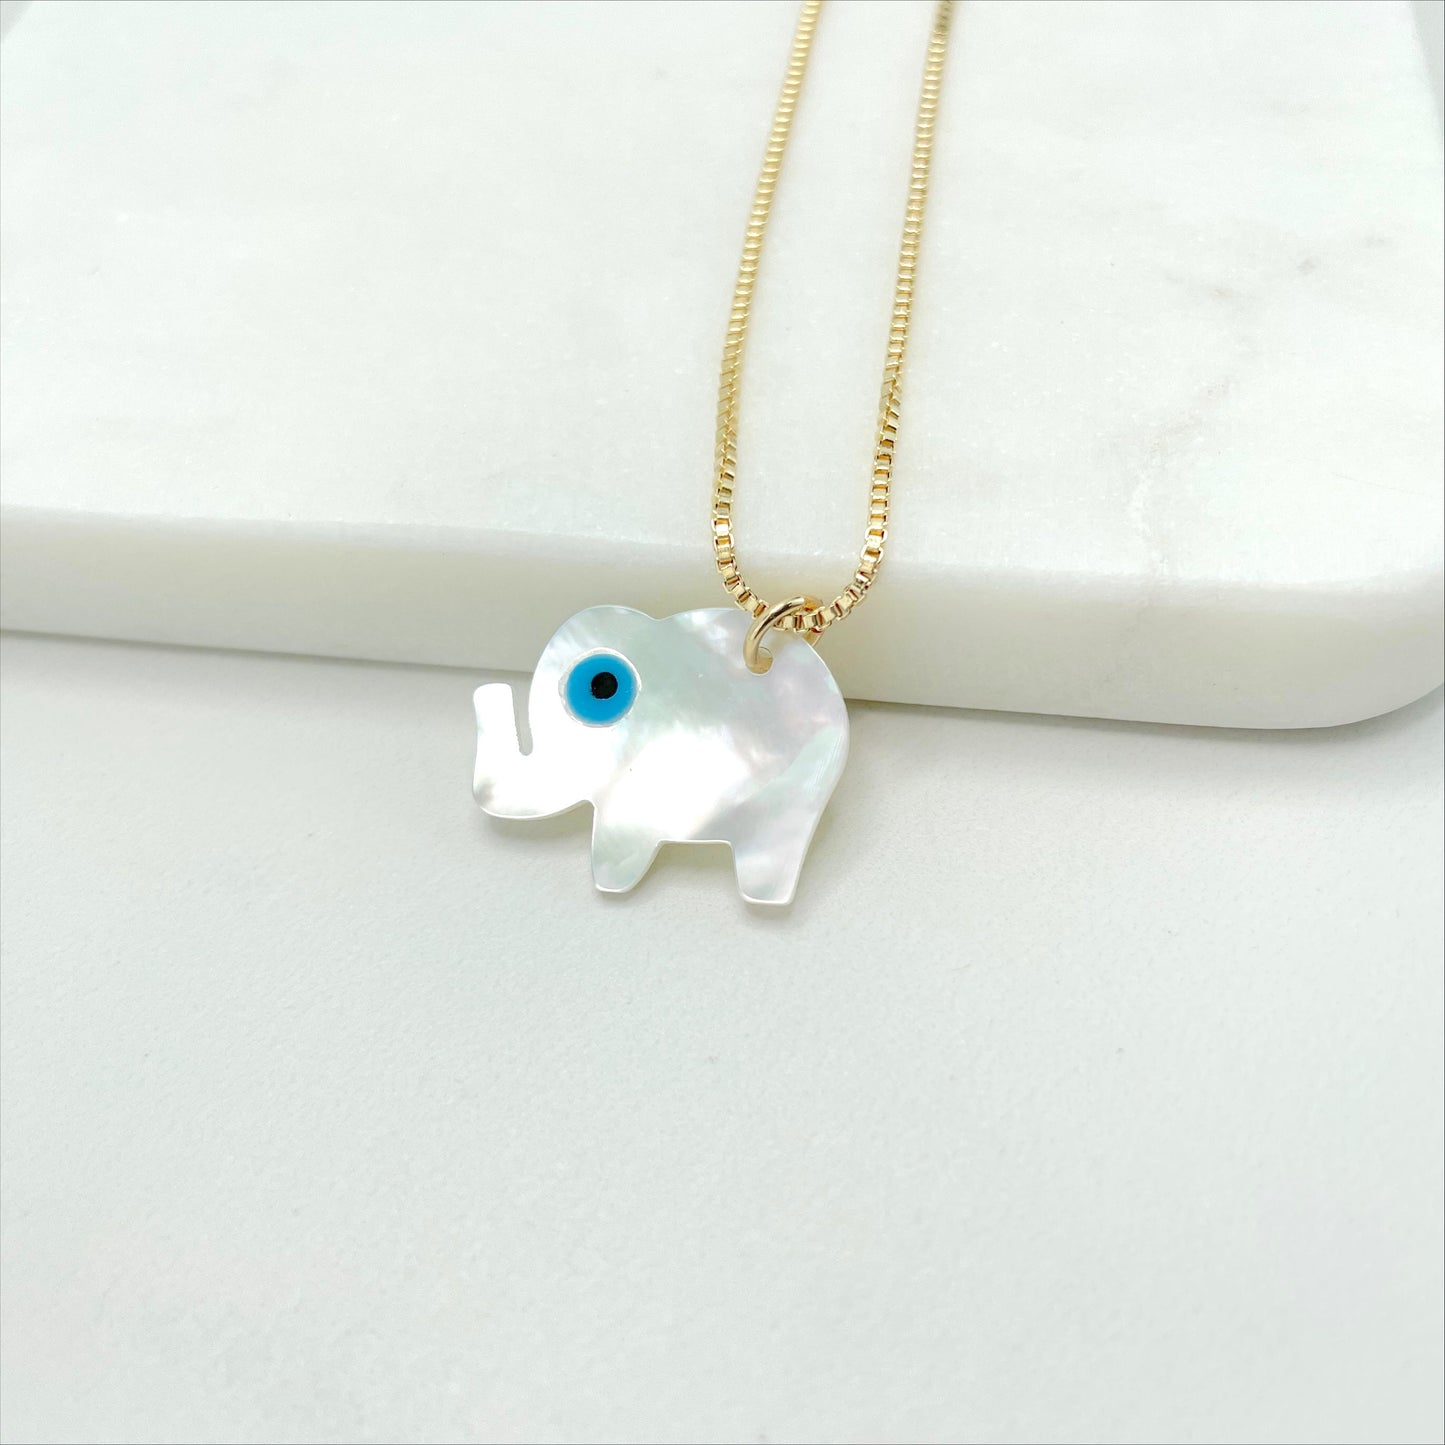 18k Gold Filled 1mm Box Chain Necklace with Elephant Madreperola Pendant and Evil Eye, Wholesale Jewelry Making Supplies